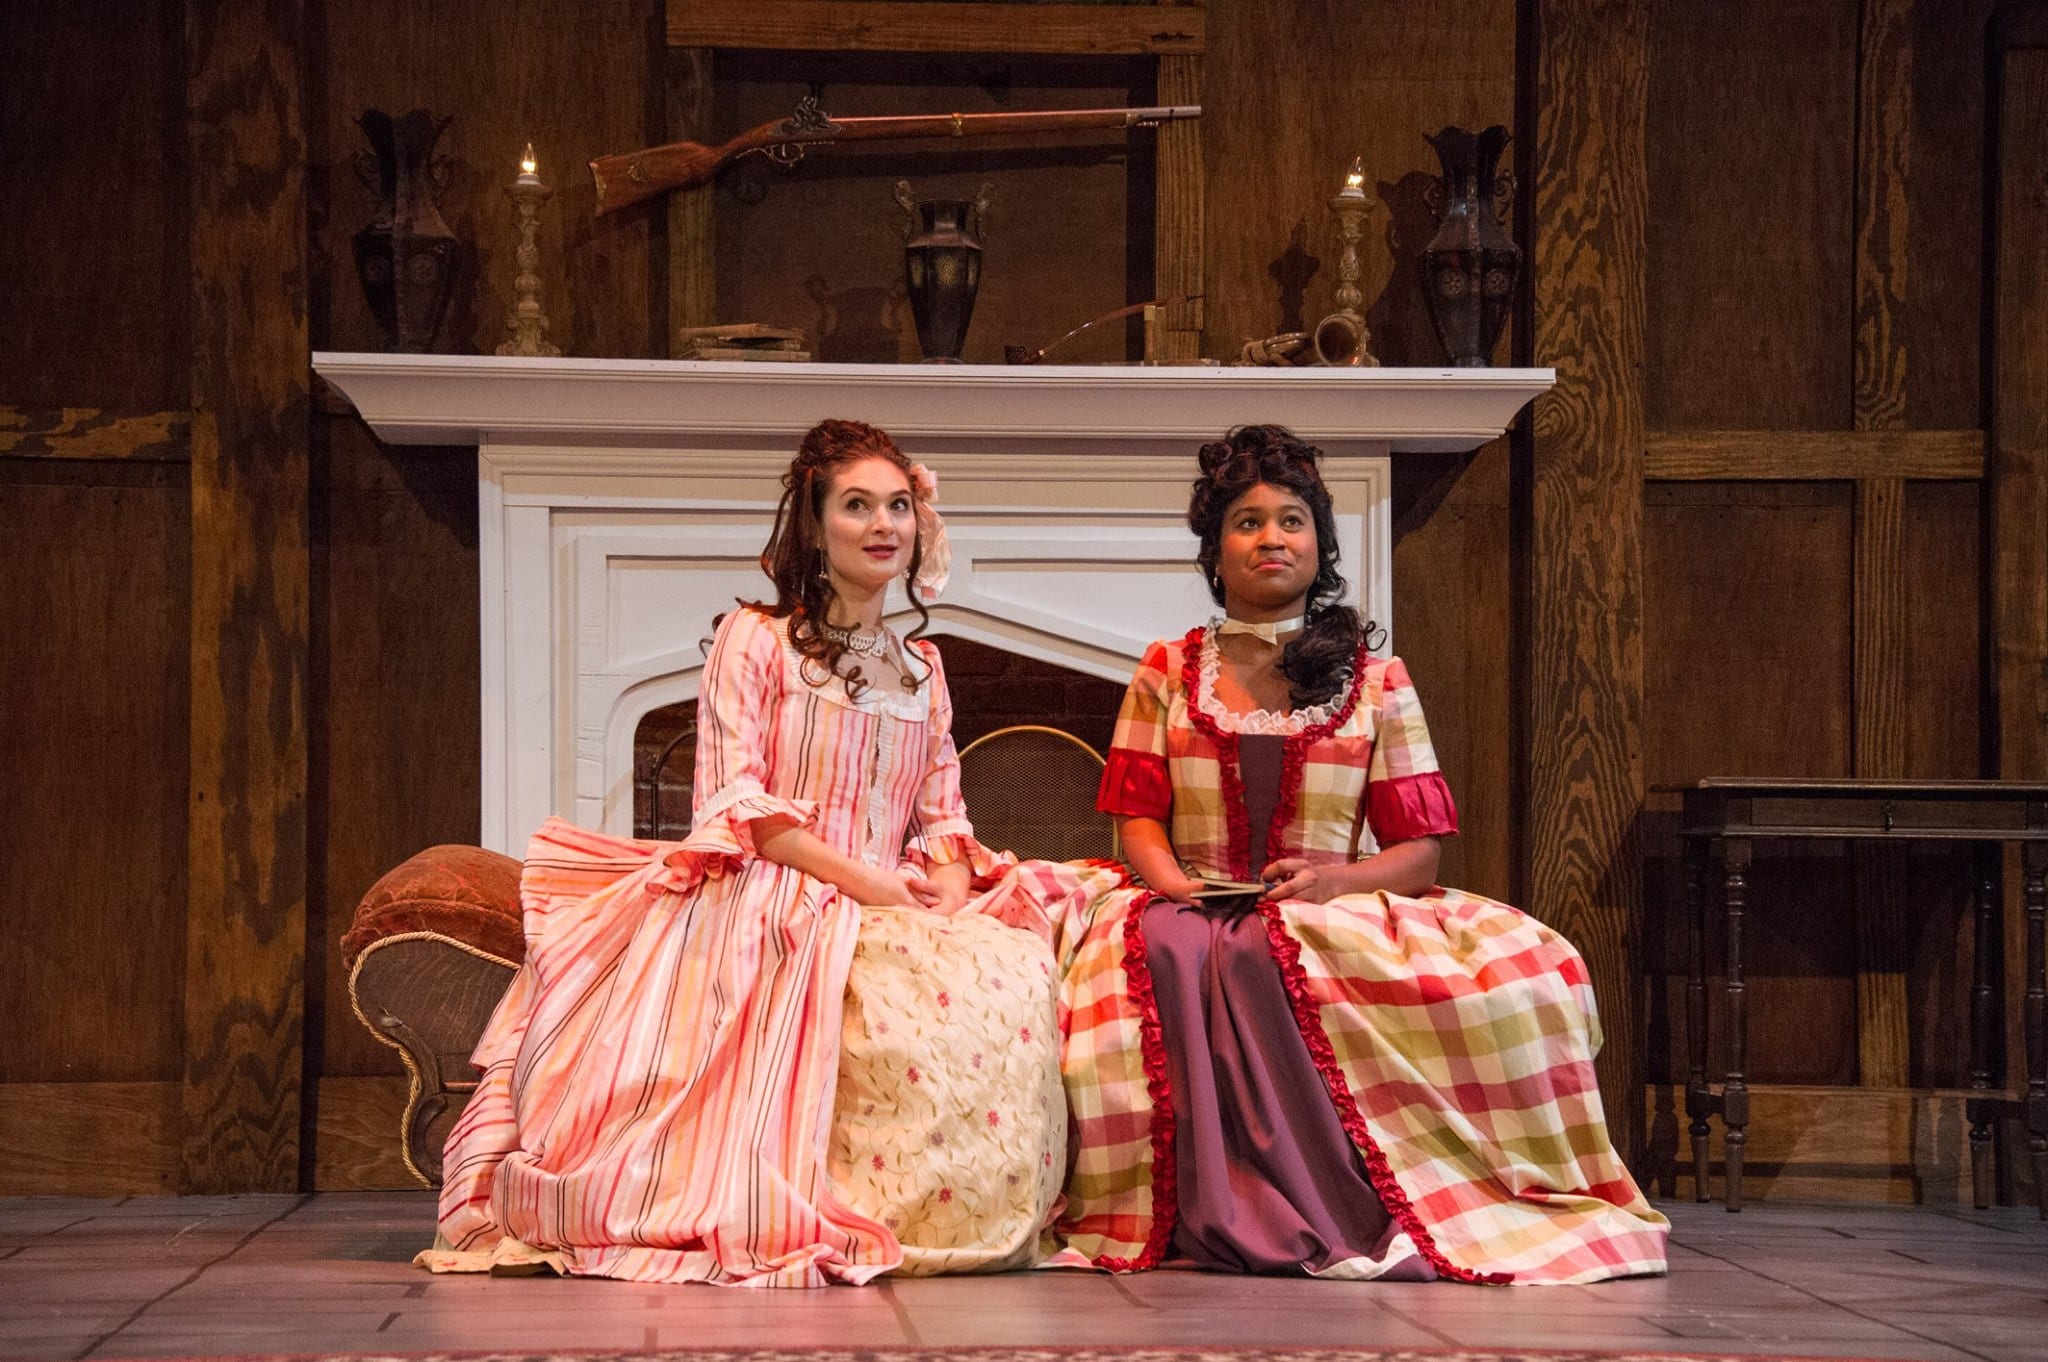 Anna DiGiovanni and Elana Michelle in She Stoops to Conquer, now playing at the Chesapeake Shakespeare Company. Photo by C. Stanley Photography.